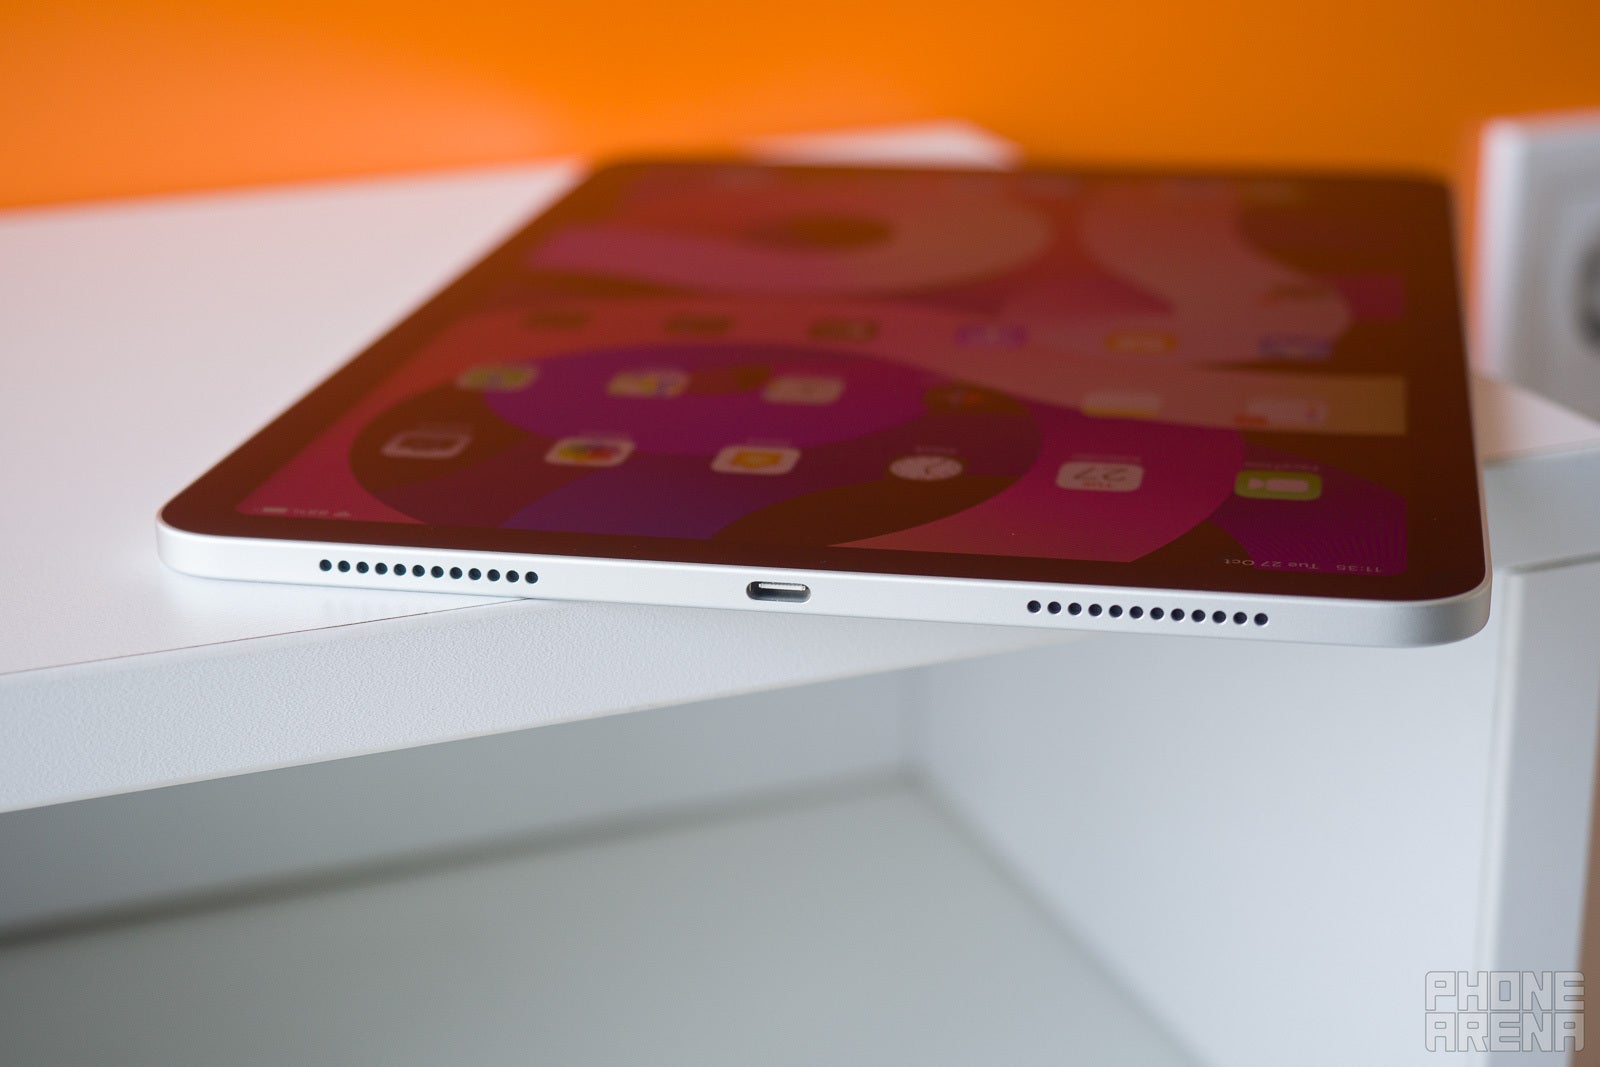 Although it has four speaker grills, two on each side, the iPad Air seems to actually pack two speakers - Apple iPad Air (2020) Review